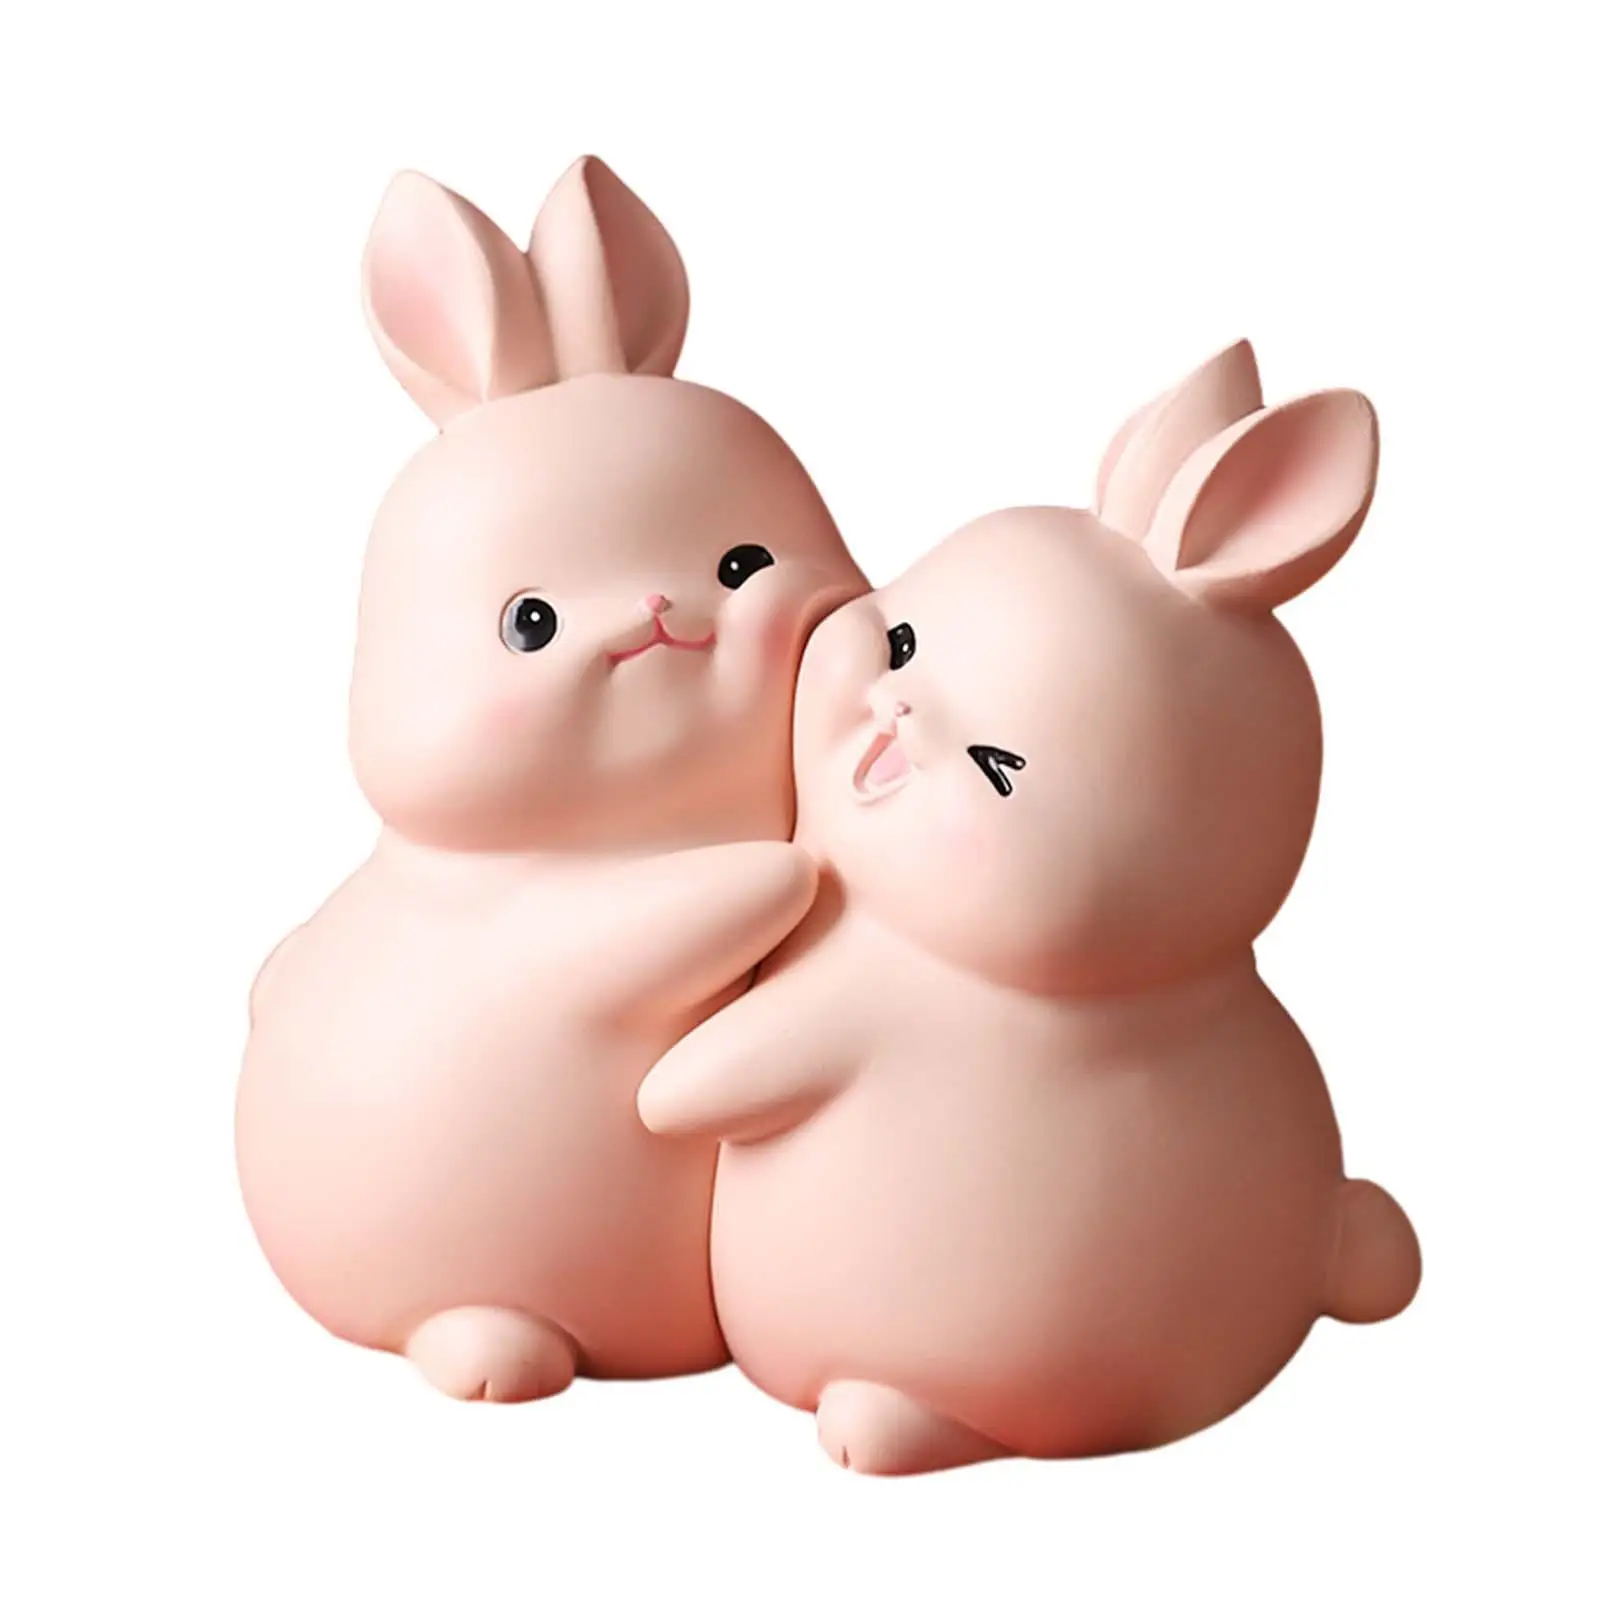 Rabbit Bookends Bunny Book Ends Cute Modern Statues Sculptures Decorative Bookends for Shelves Home Cabinet Kids Rooms Ornaments